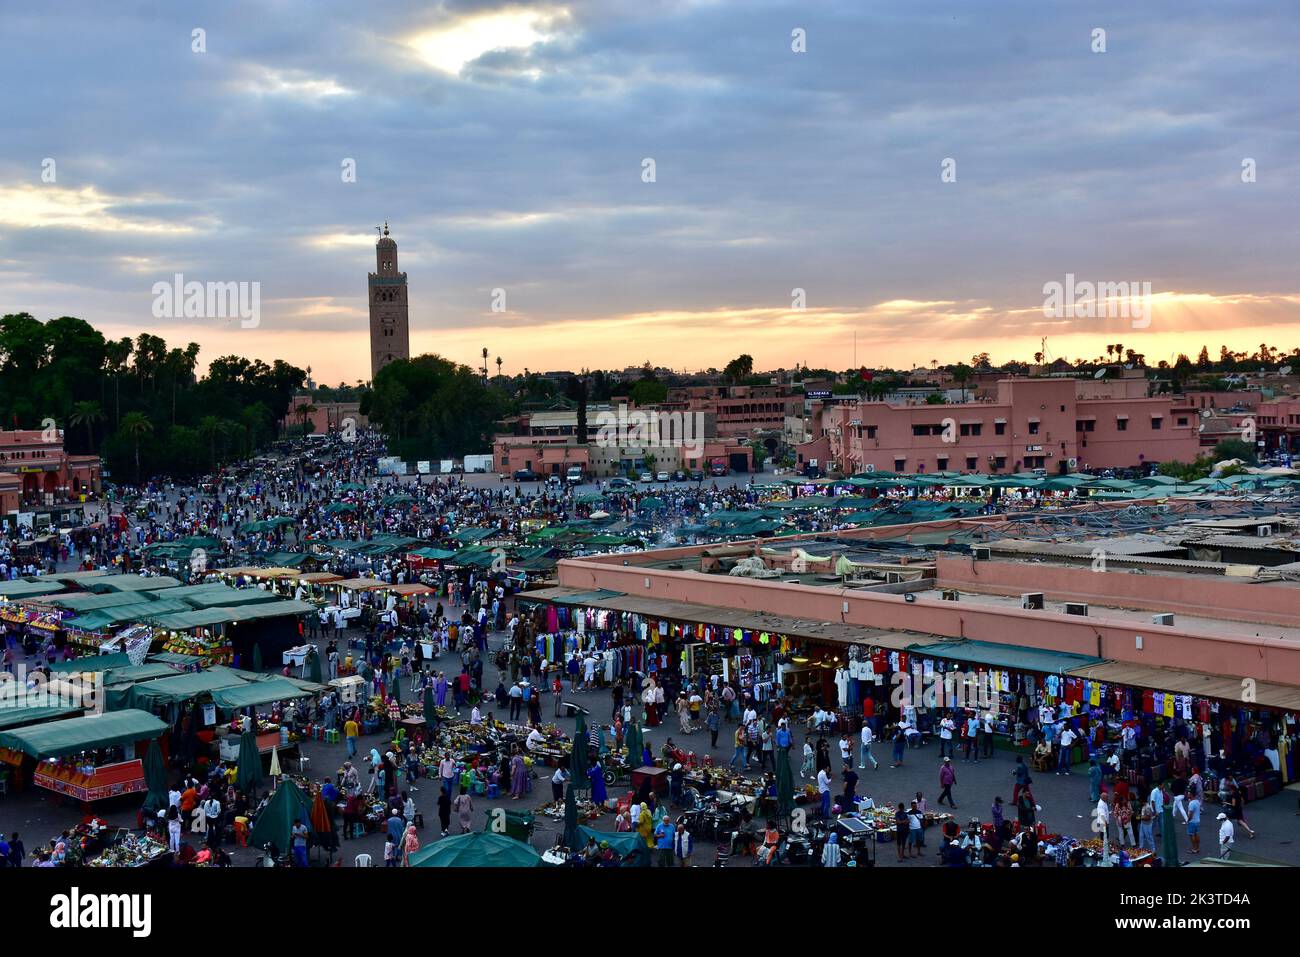 Crowded evening before sunset in Jemaa el'Fna square of Marrakech Stock Photo